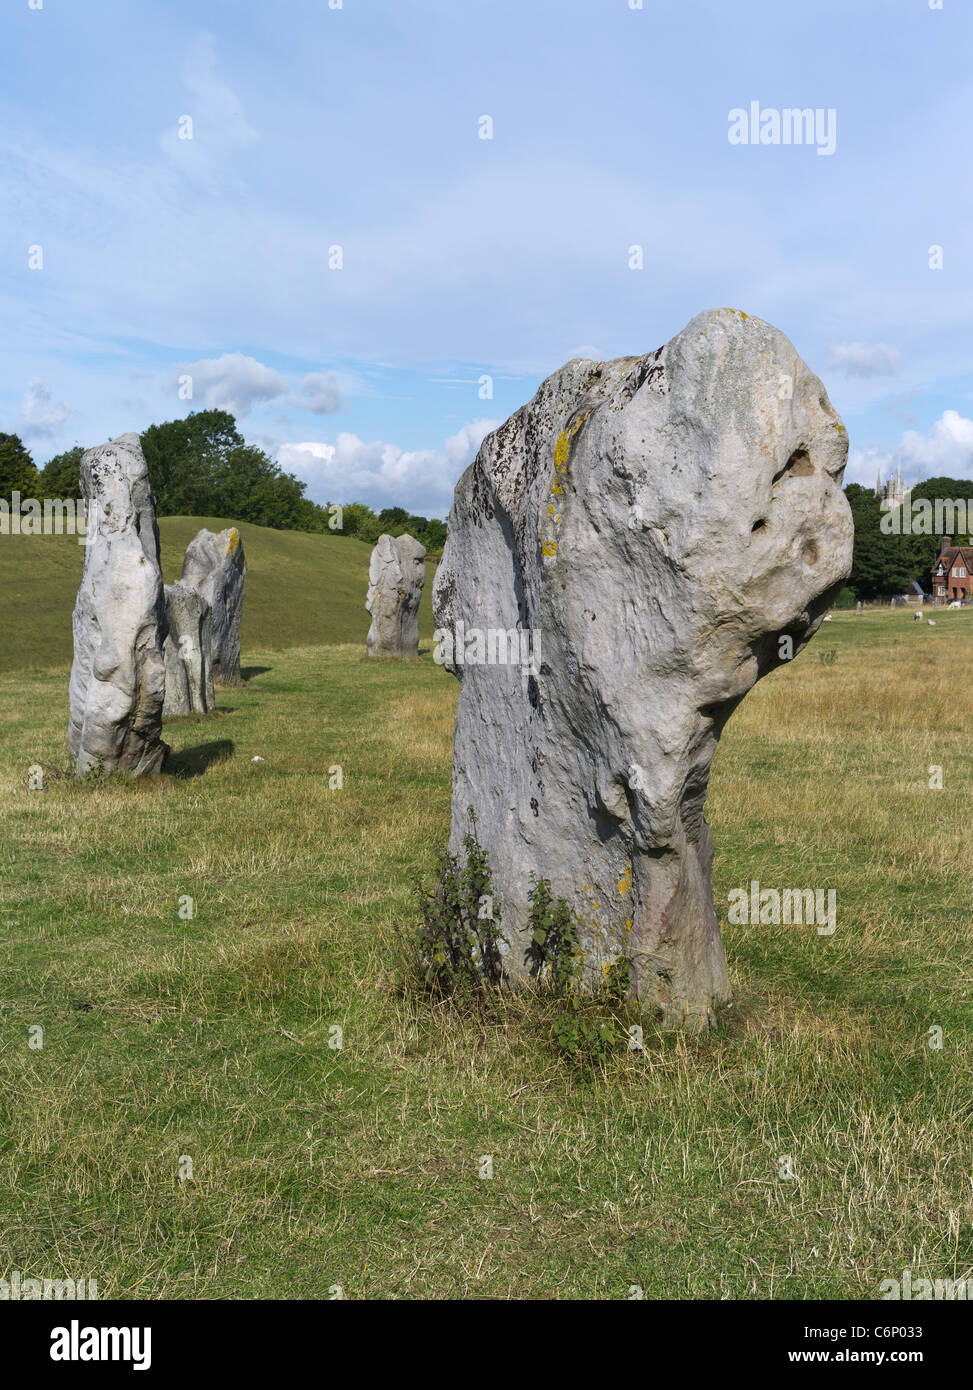 dh Megalithic standing stones AVEBURY STONE CIRCLE WILTSHIRE ENGLAND Britain bronze age neolithic sites uk ancient henge monument site Stock Photo